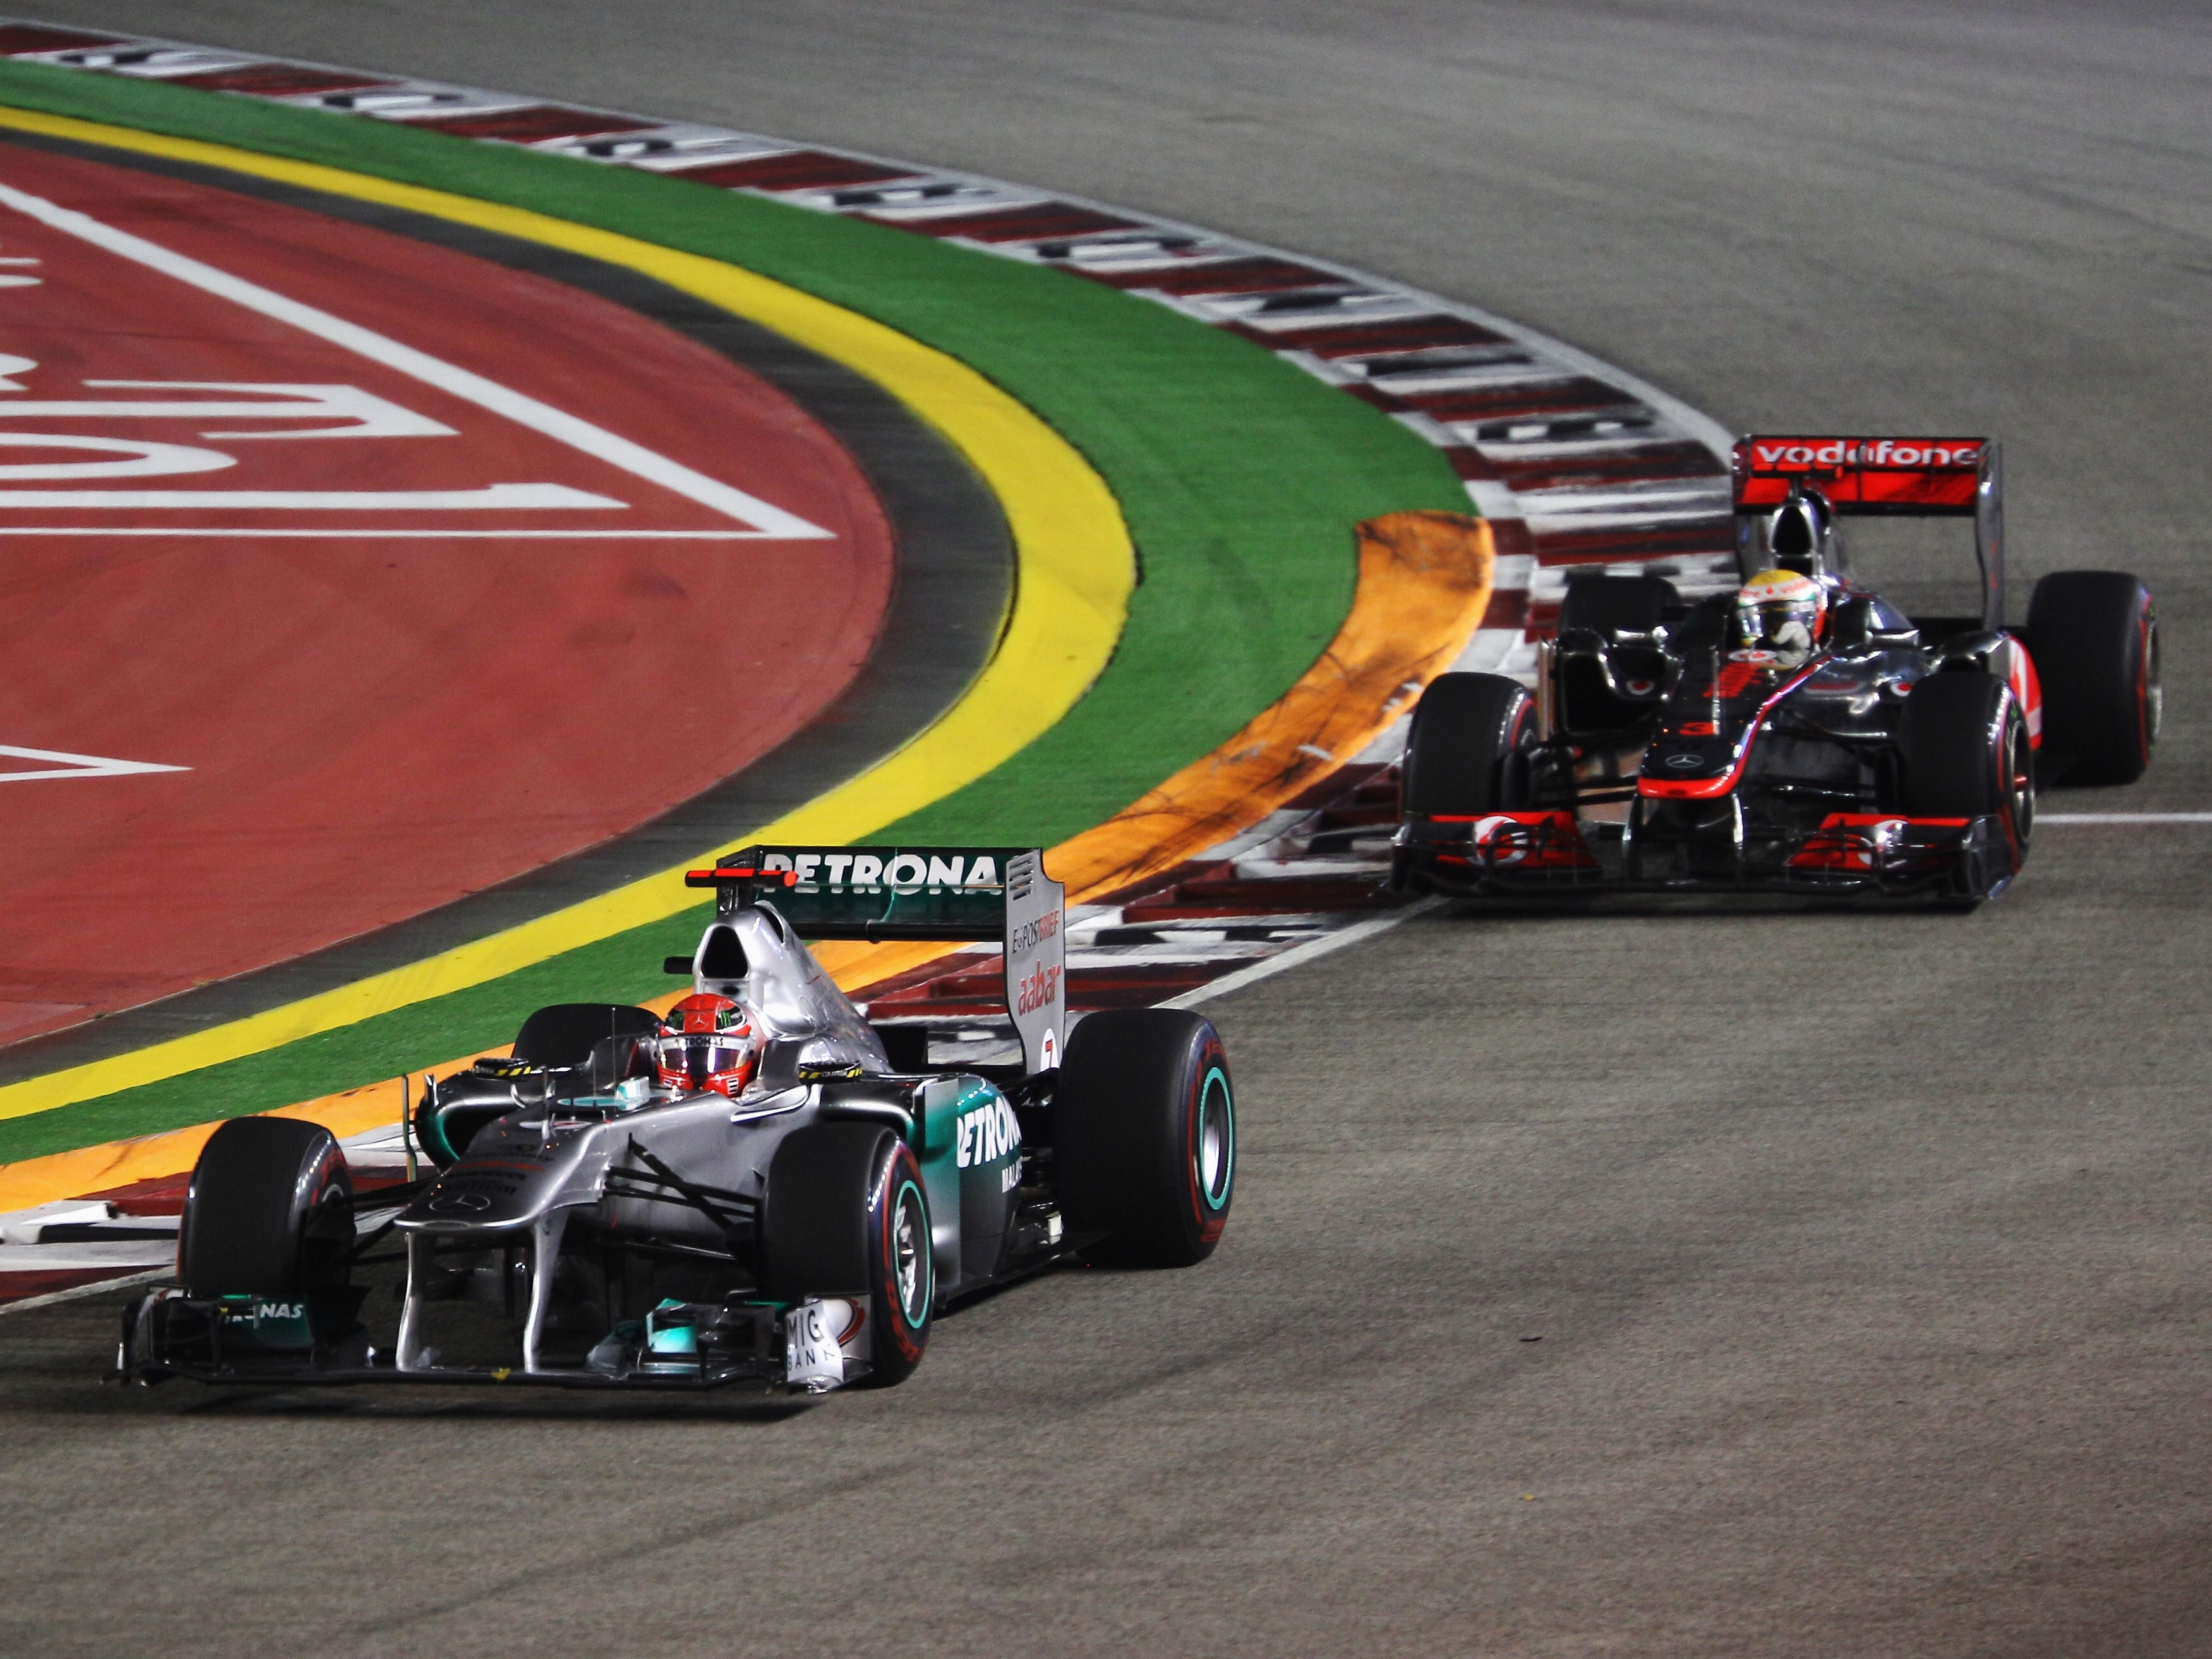 Michael Schumacher leads from Lewis Hamilton before crashing out during the 2011 F1 Singapore Grand Prix (Photo by Mark Thompson/Getty Images)